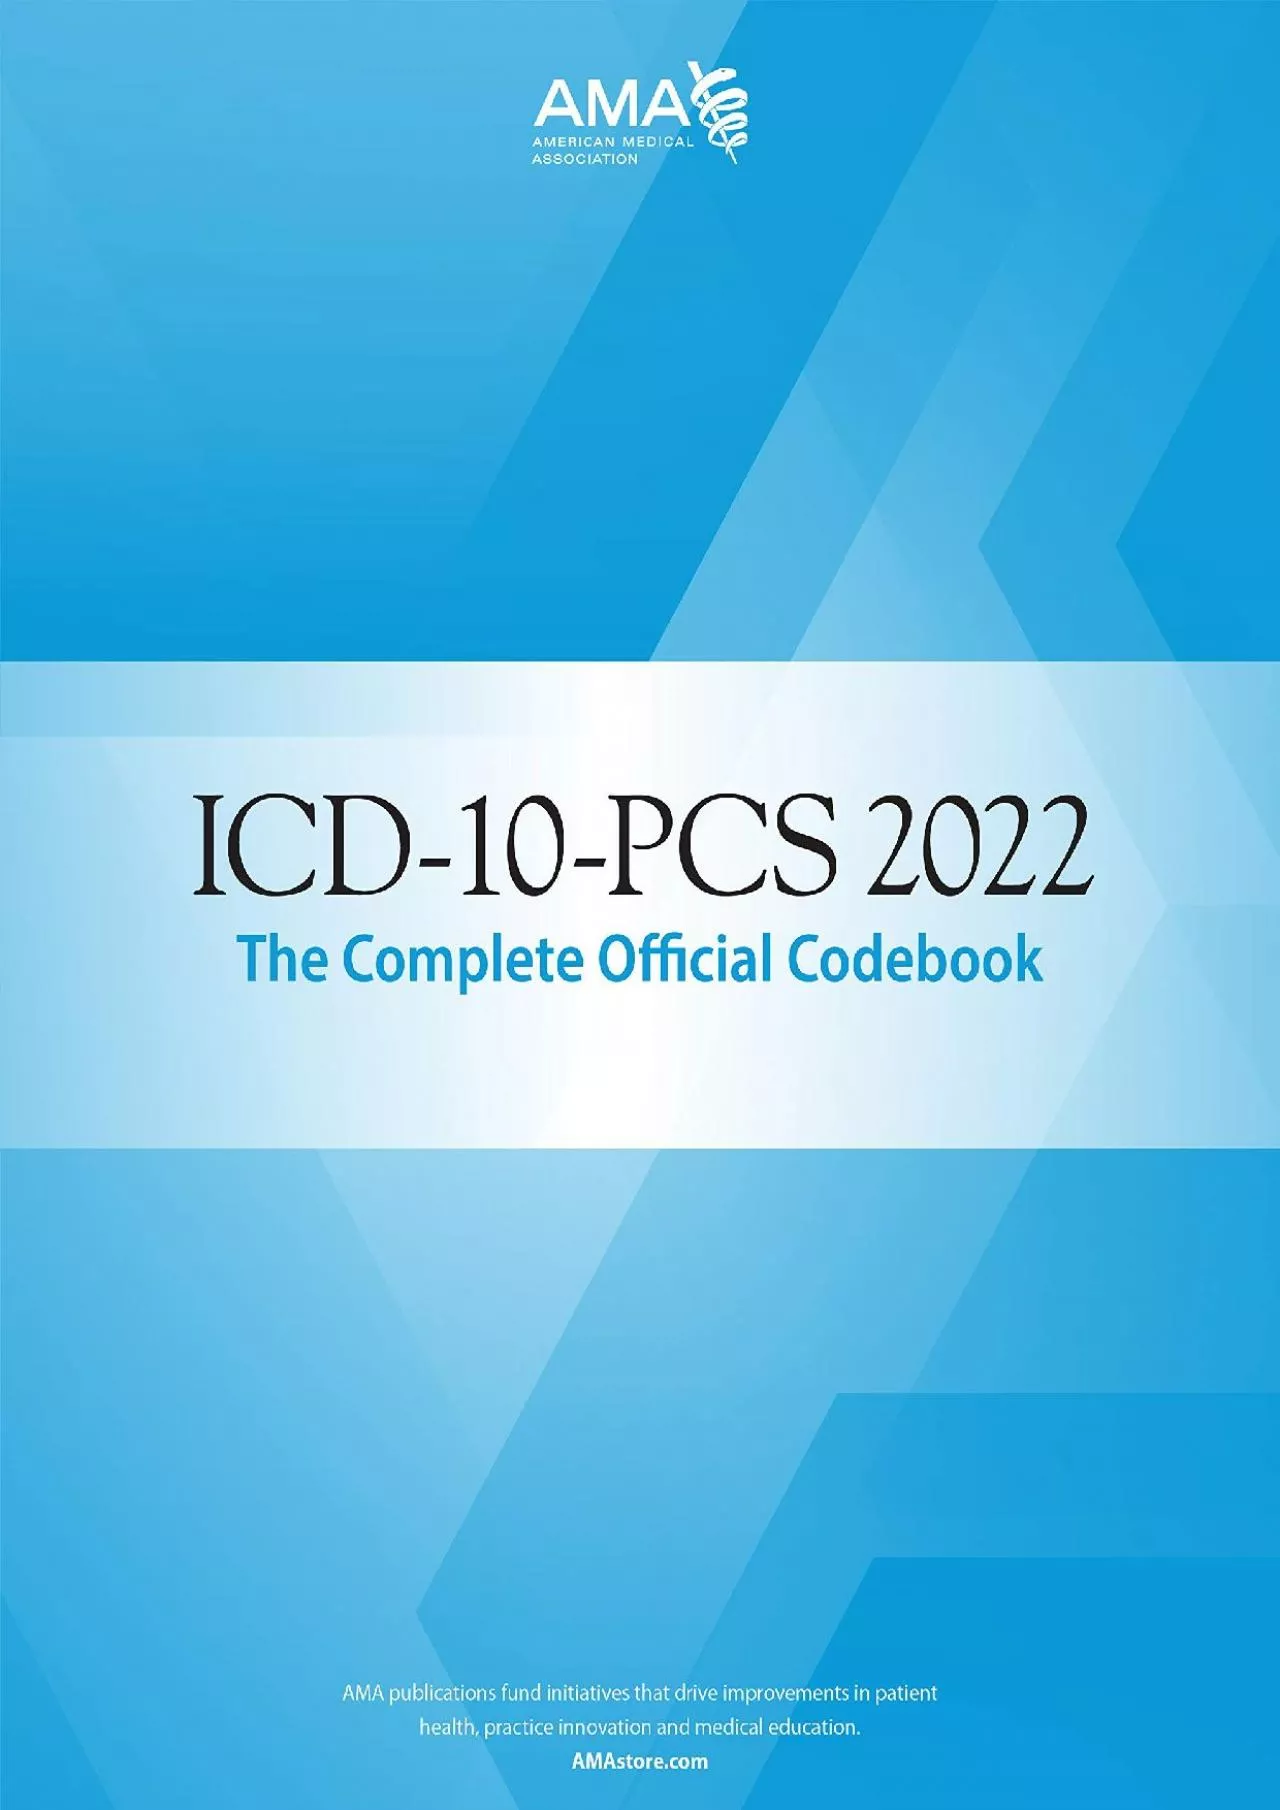 (BOOK)-ICD-10-PCS 2022: The Complete Official Codebook